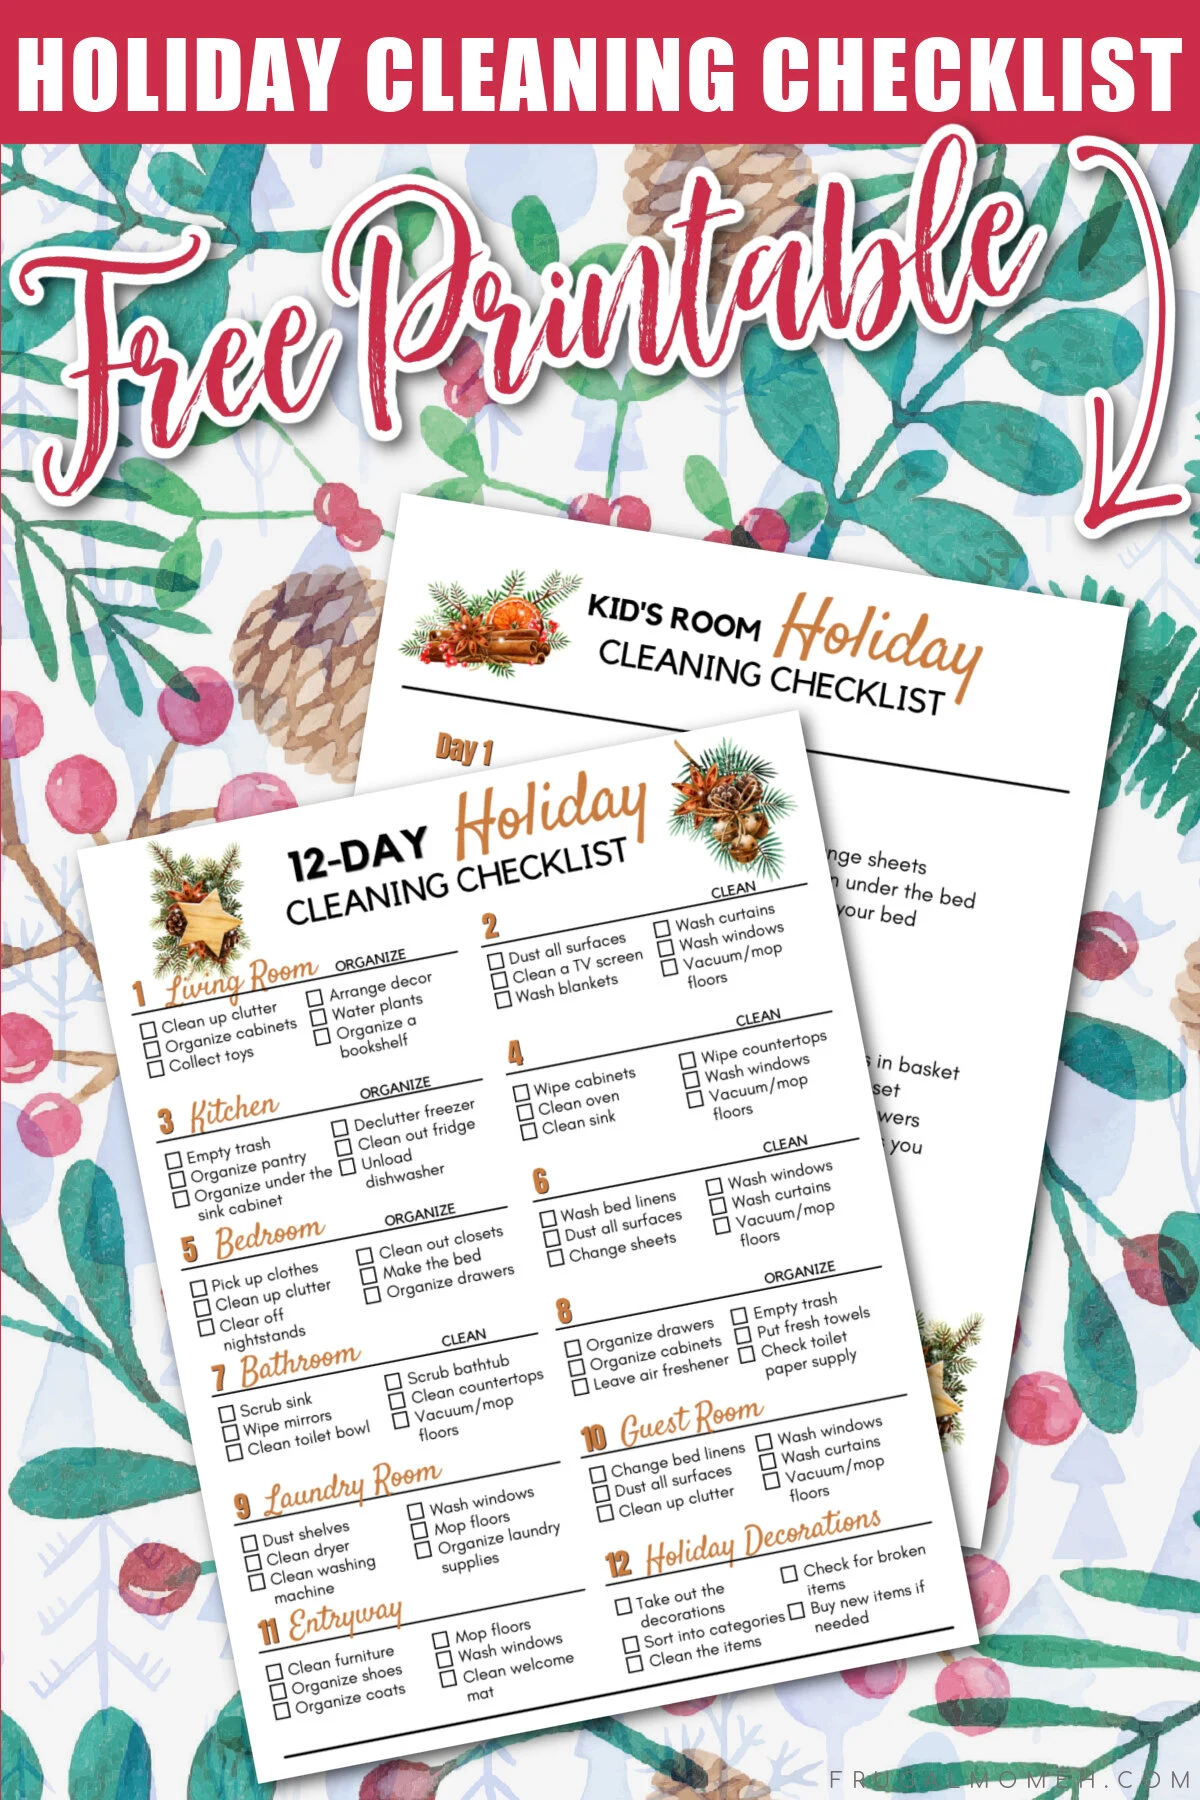 Download this free printable holiday cleaning checklist to help you get your house ready for the holidays, spread out over 12 days of tasks.